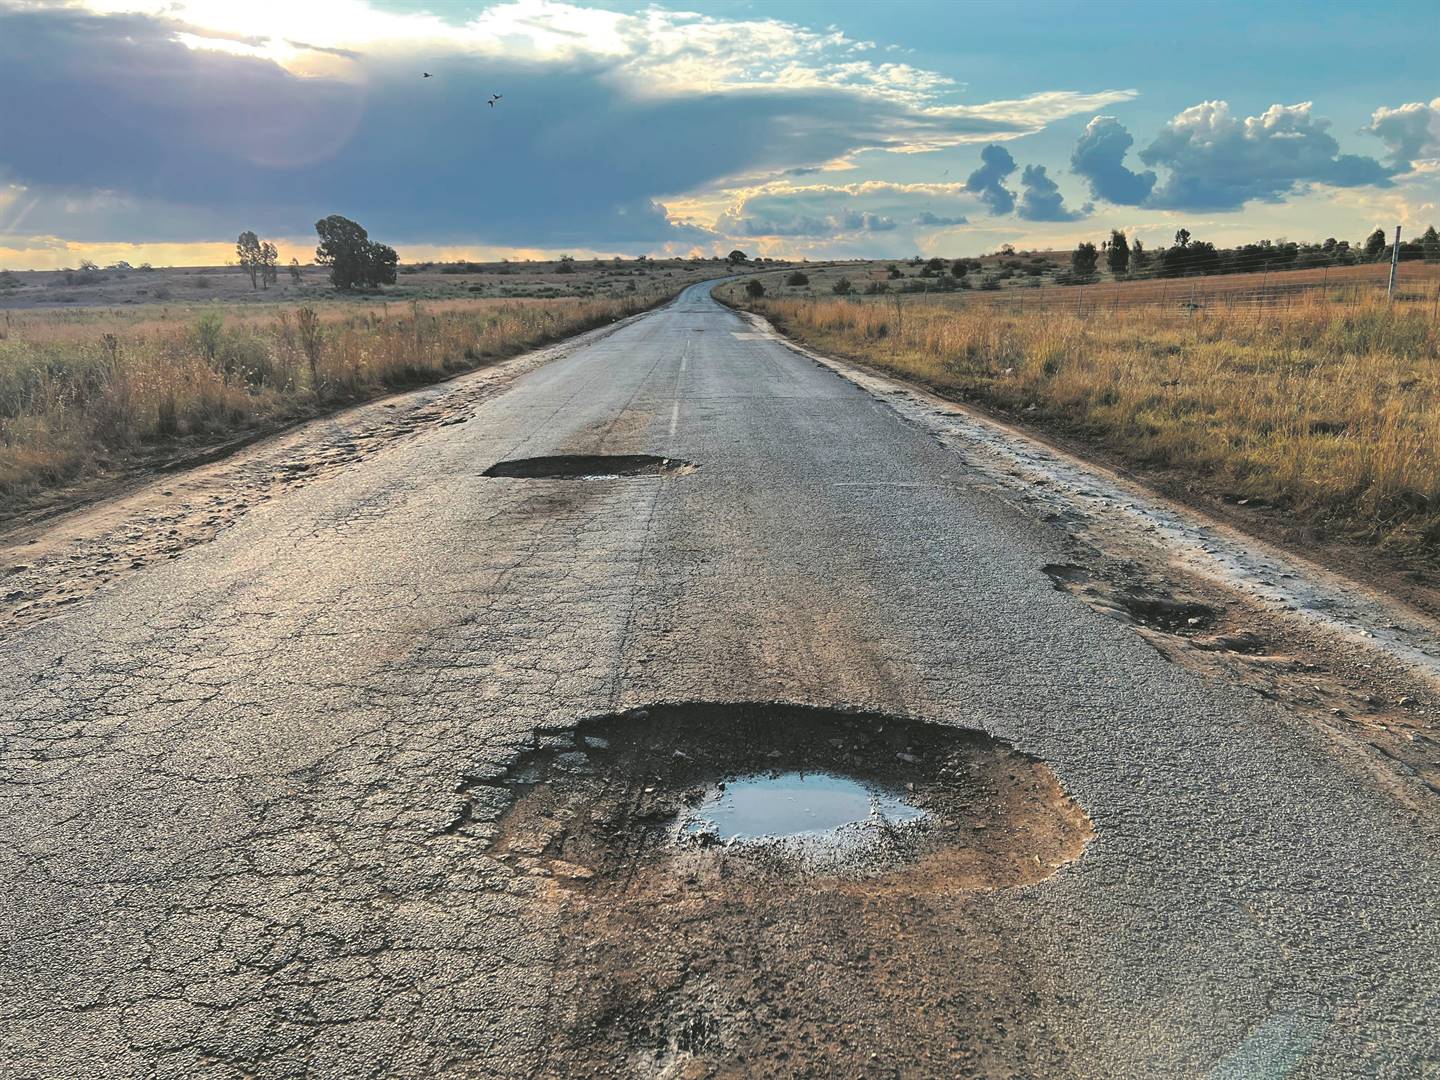 May 18.2022. Two big pothole on the road linking Welverdiend and Klerkskraal in North West province. Photo: Tebogo Letsie